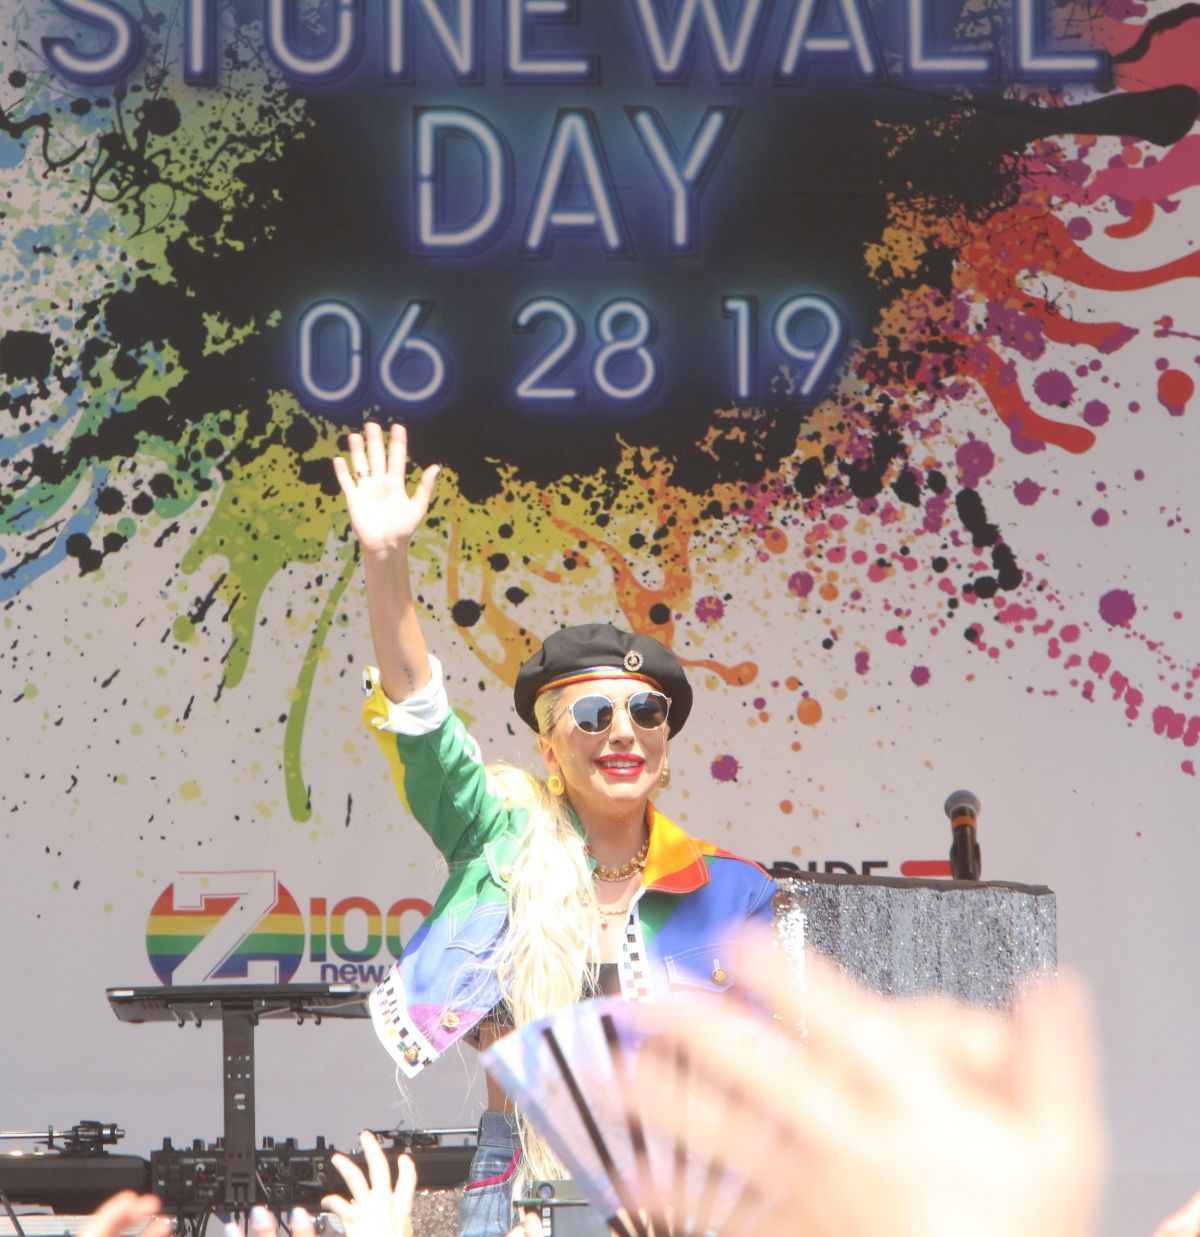 lady-gaga-performs-at-stonewall-day-and-world-pride-in-new-york-06-28-2019-0.jpg